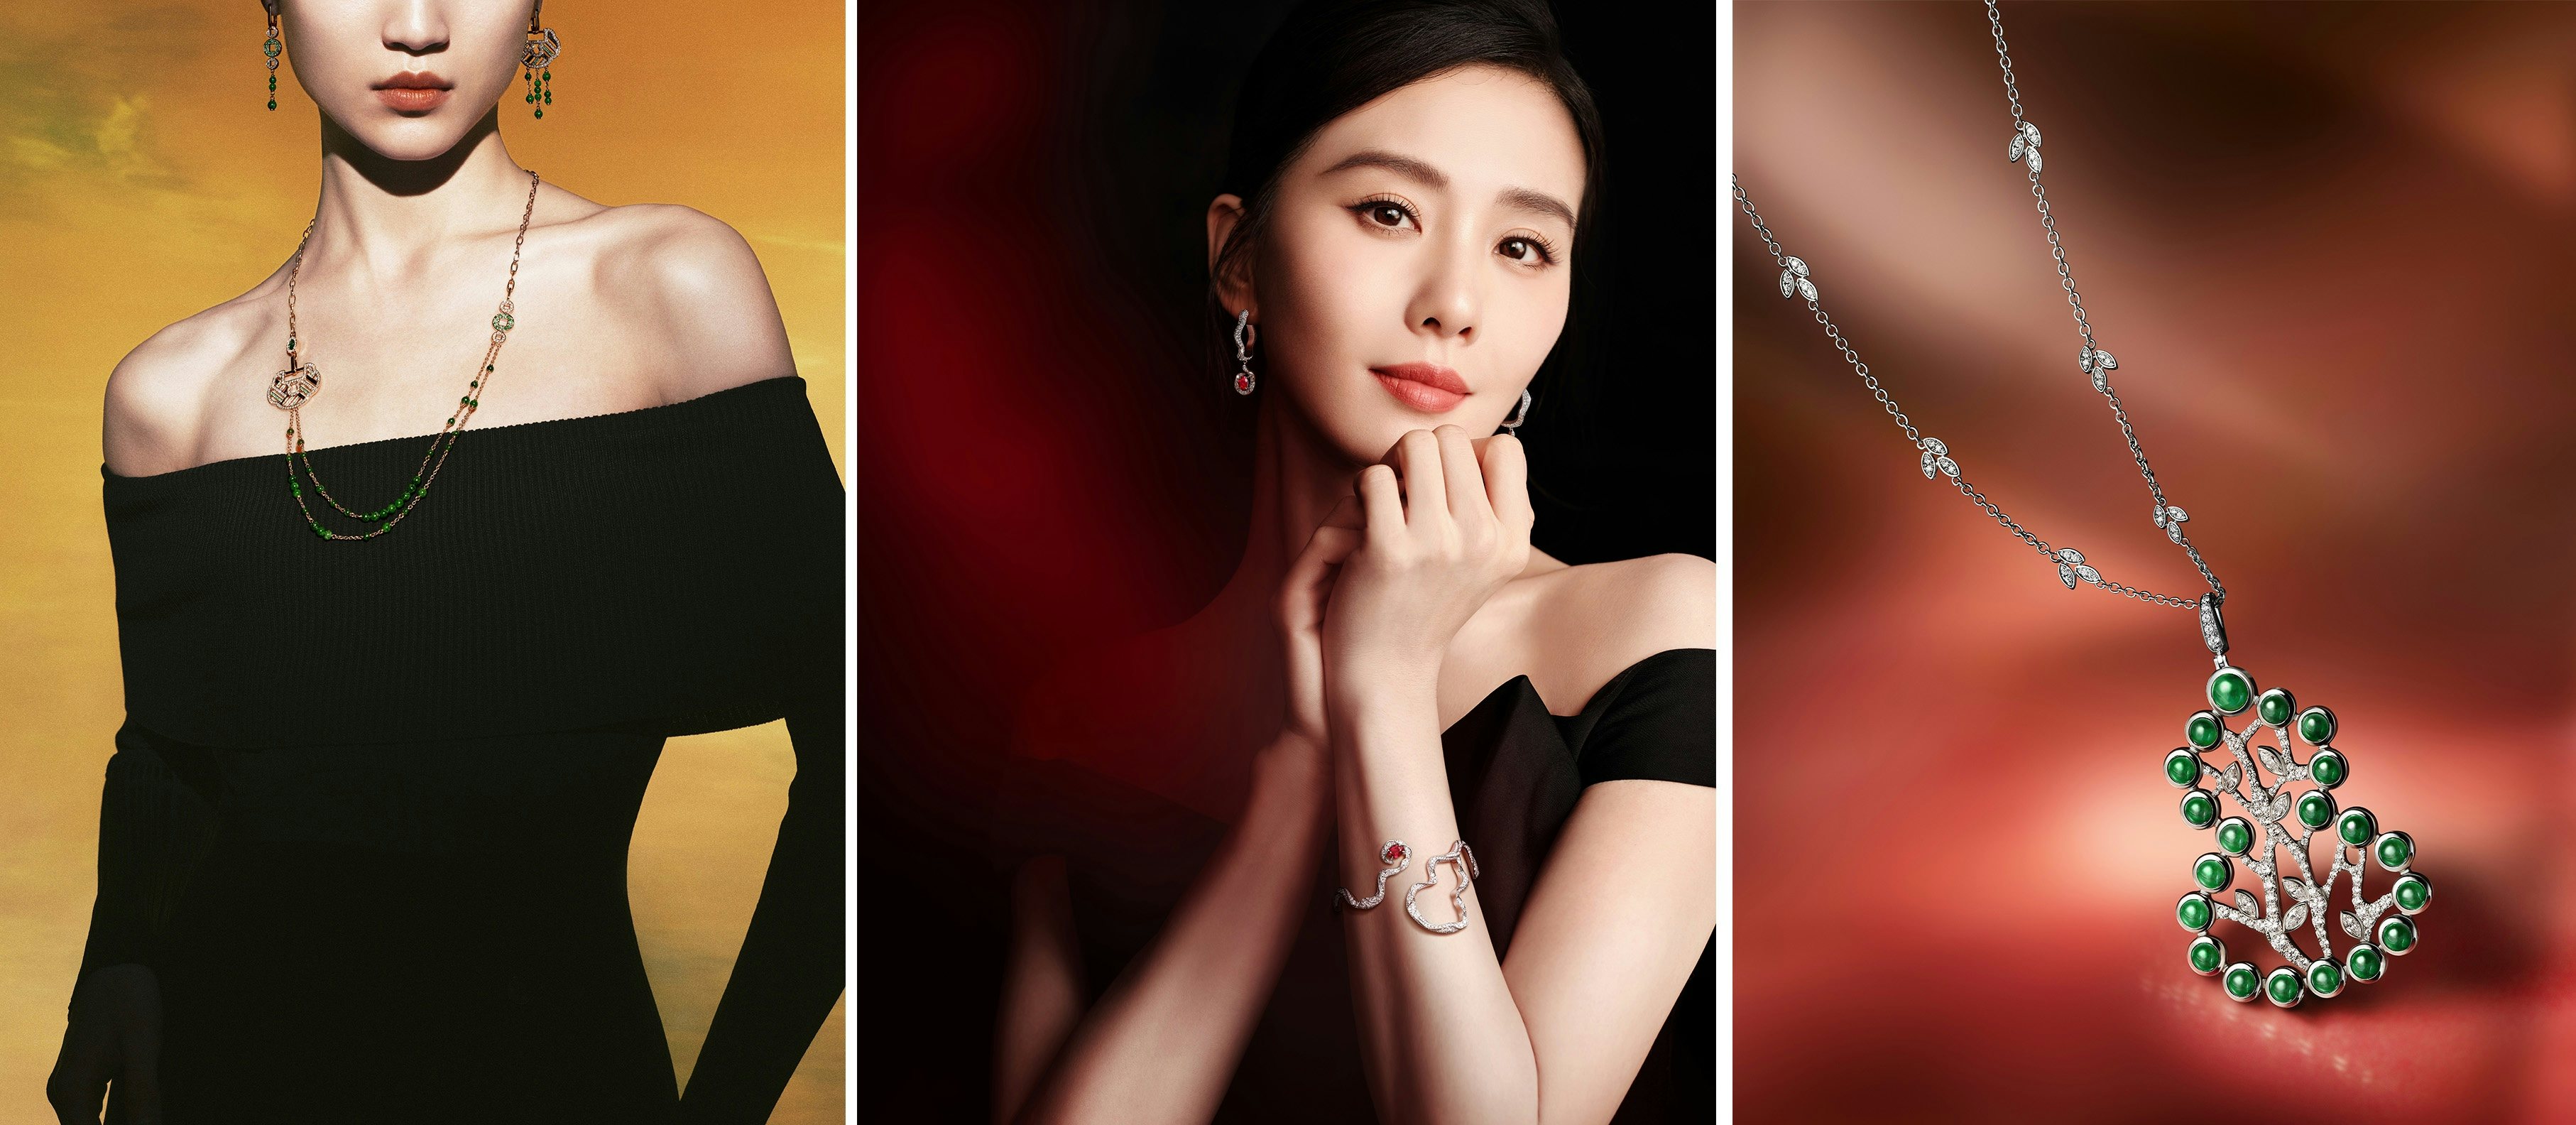 From left: The Yu Yi fine jewelry collection, Wulu Fairy fine jewelry collection, and Wulu 20 fine jewelry collection. Photo: Qeelin